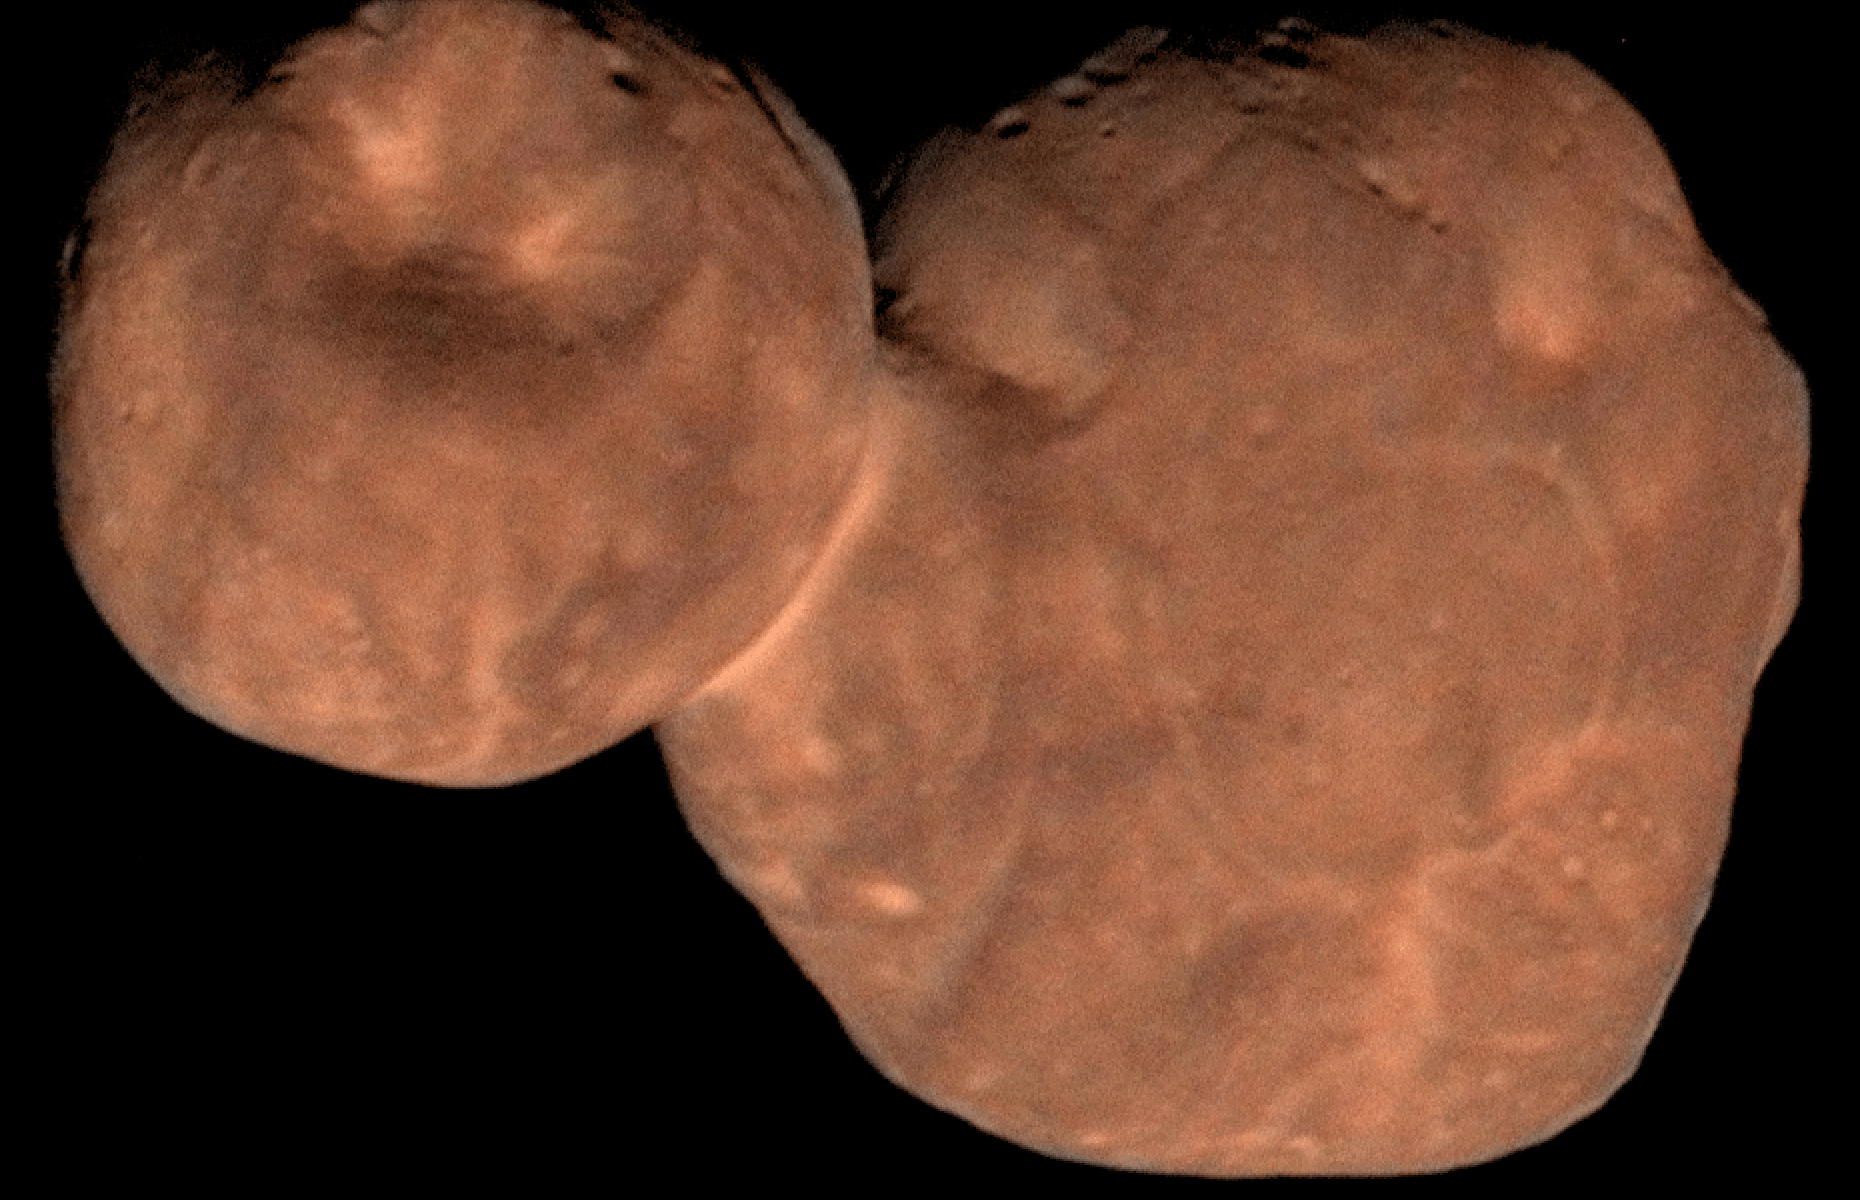 This composite image of the primordial contact binary Kuiper Belt object 2014 MU69 (officially named Arrokoth) was compiled from data obtained by NASA's New Horizons spacecraft as it flew by the object on Jan. 1, 2019. The image combines enhanced color data (close to what the human eye would see) with detailed high-resolution panchromatic pictures. Credits: NASA/Johns Hopkins University Applied Physics Laboratory/Southwest Research Institute//Roman Tkachenko